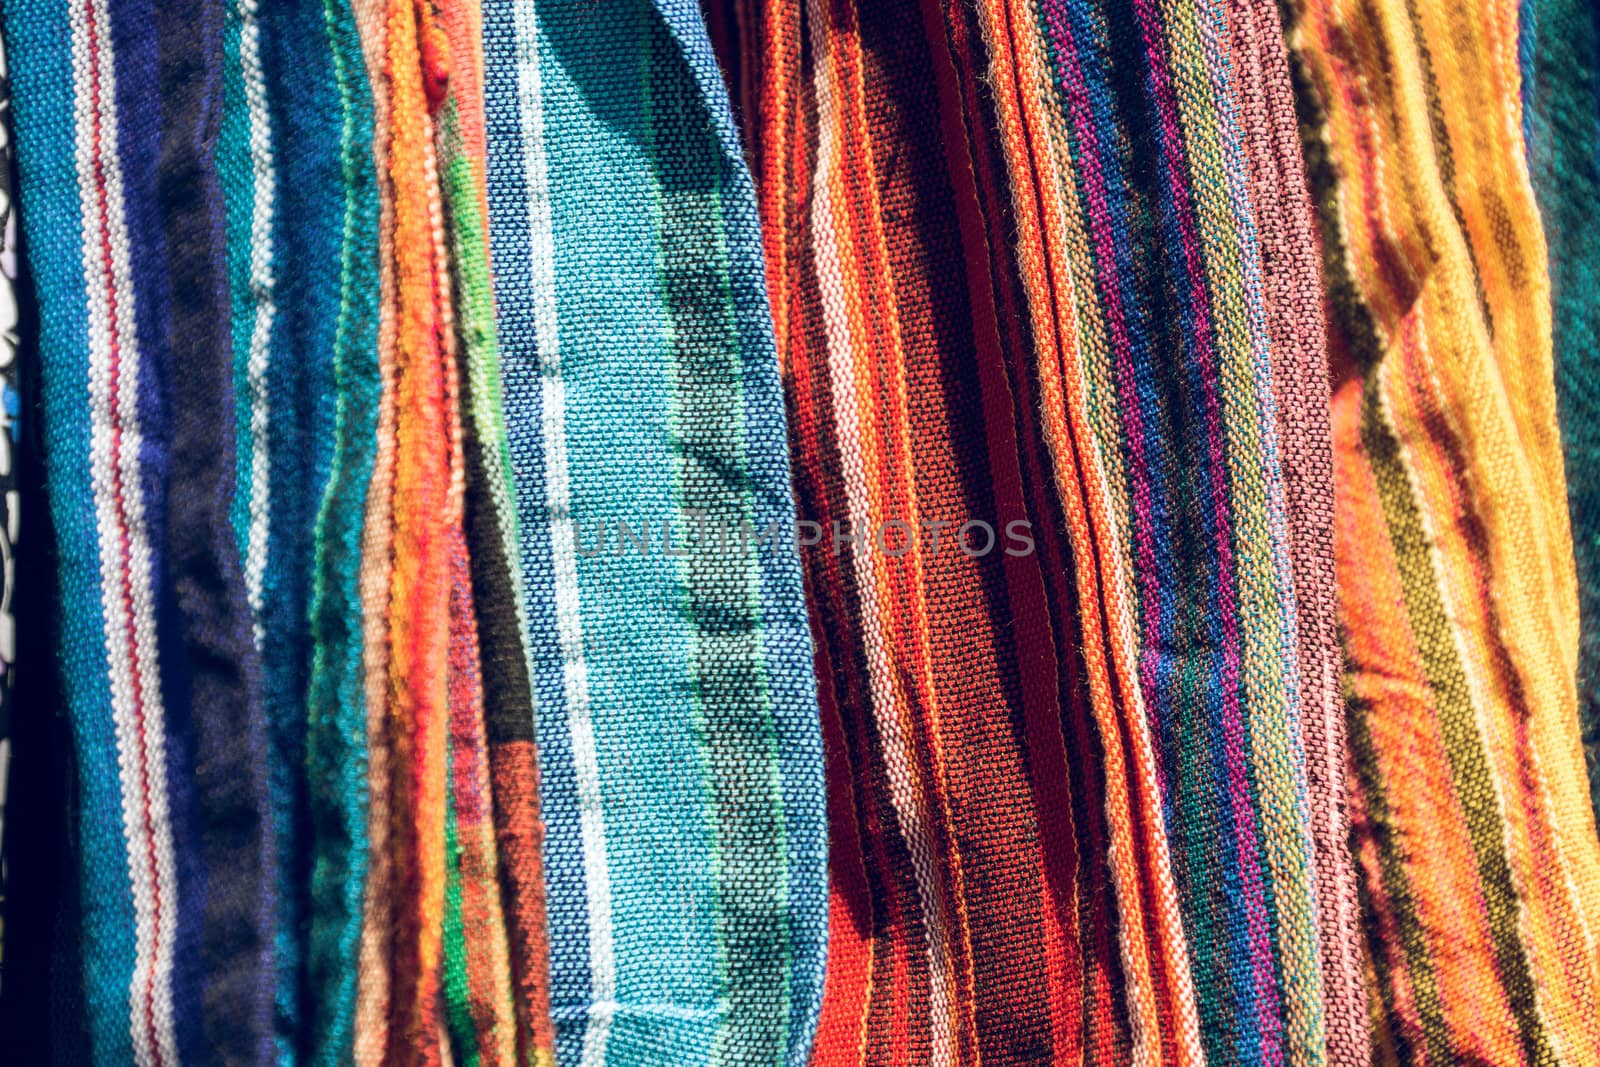 Abstract detail of a pile of colourful fabrics at a flea market by geogif